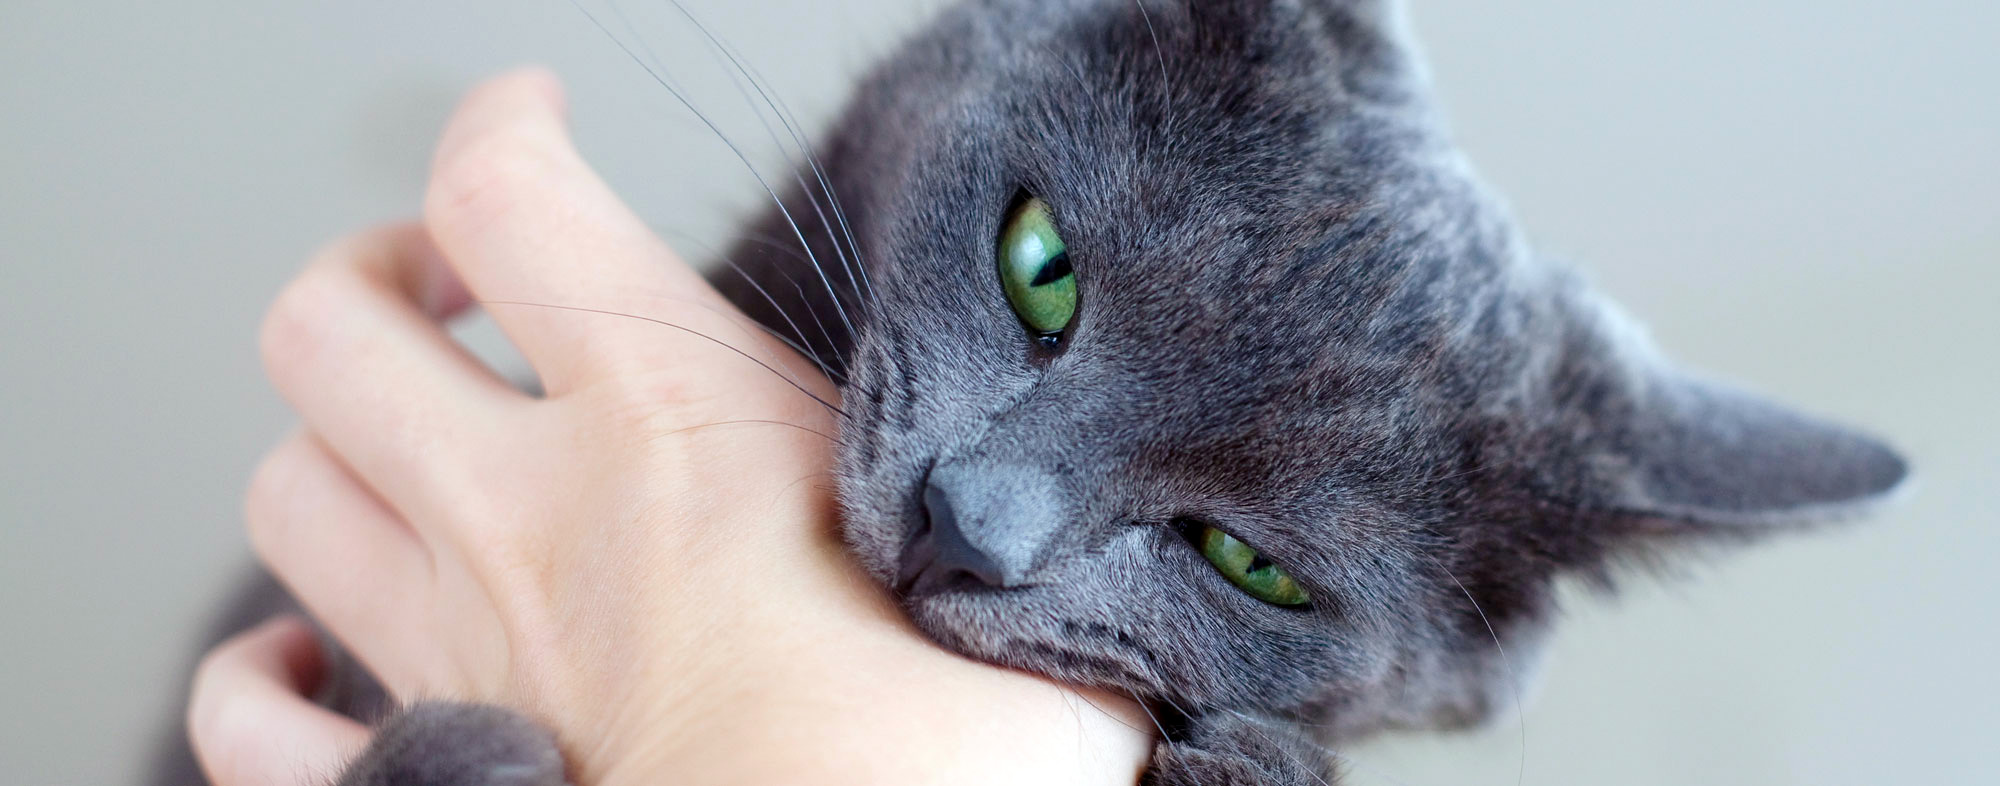 Treating Cat Bites and Scratches - HubPages